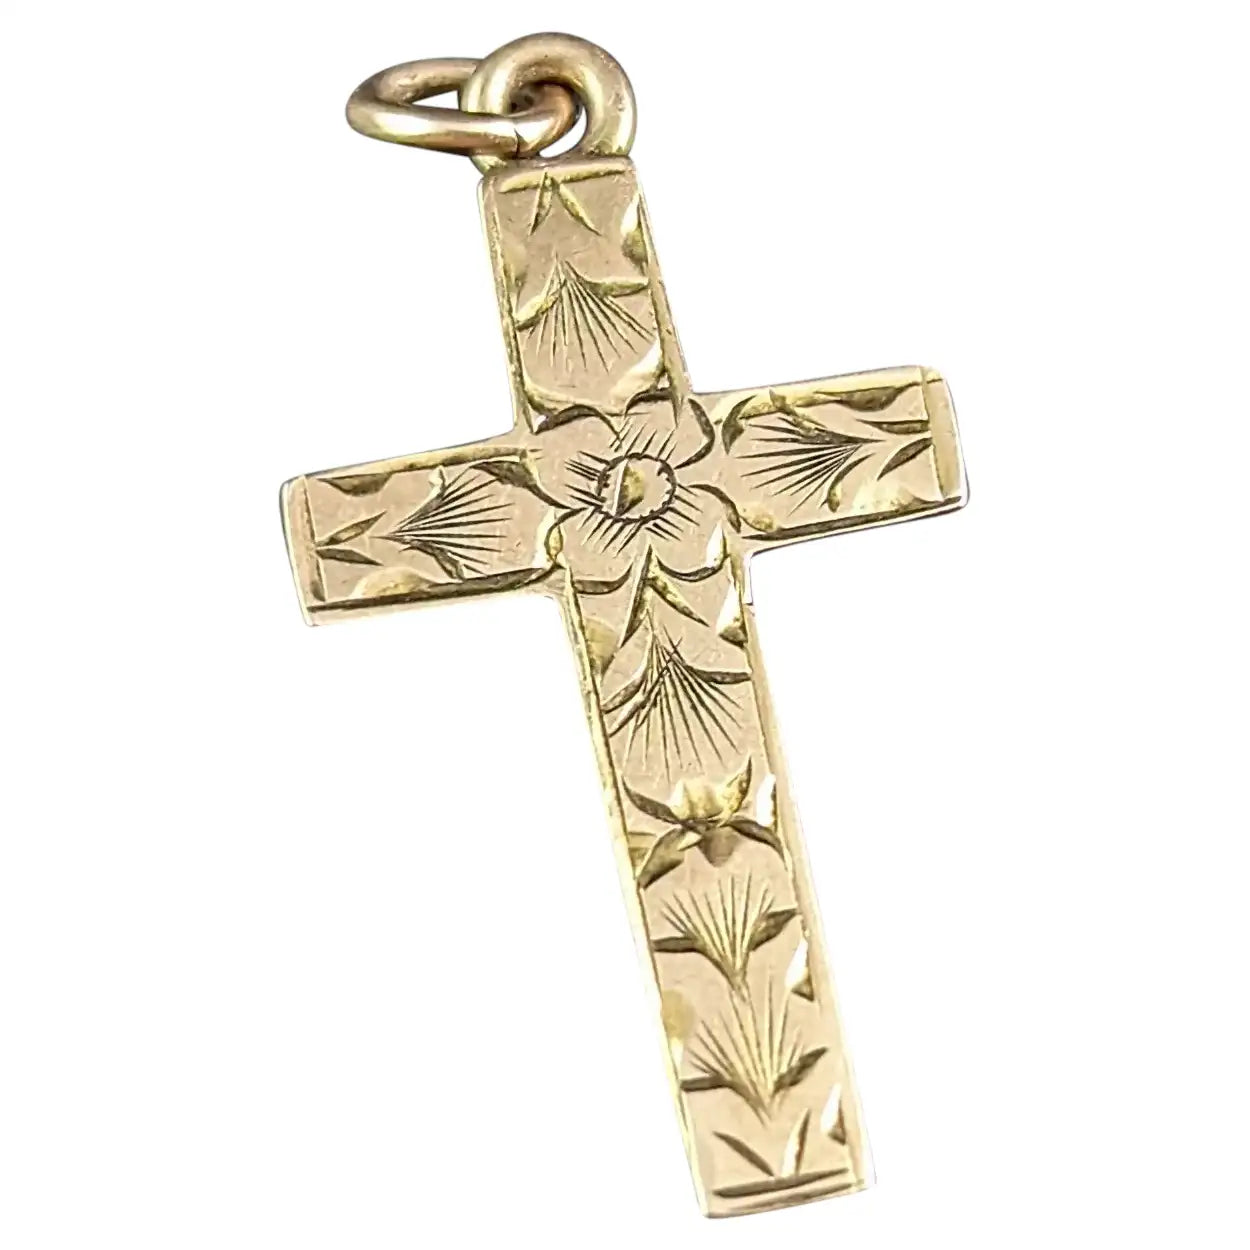 Tiny antique 9ct gold cross pendant, floral engraved